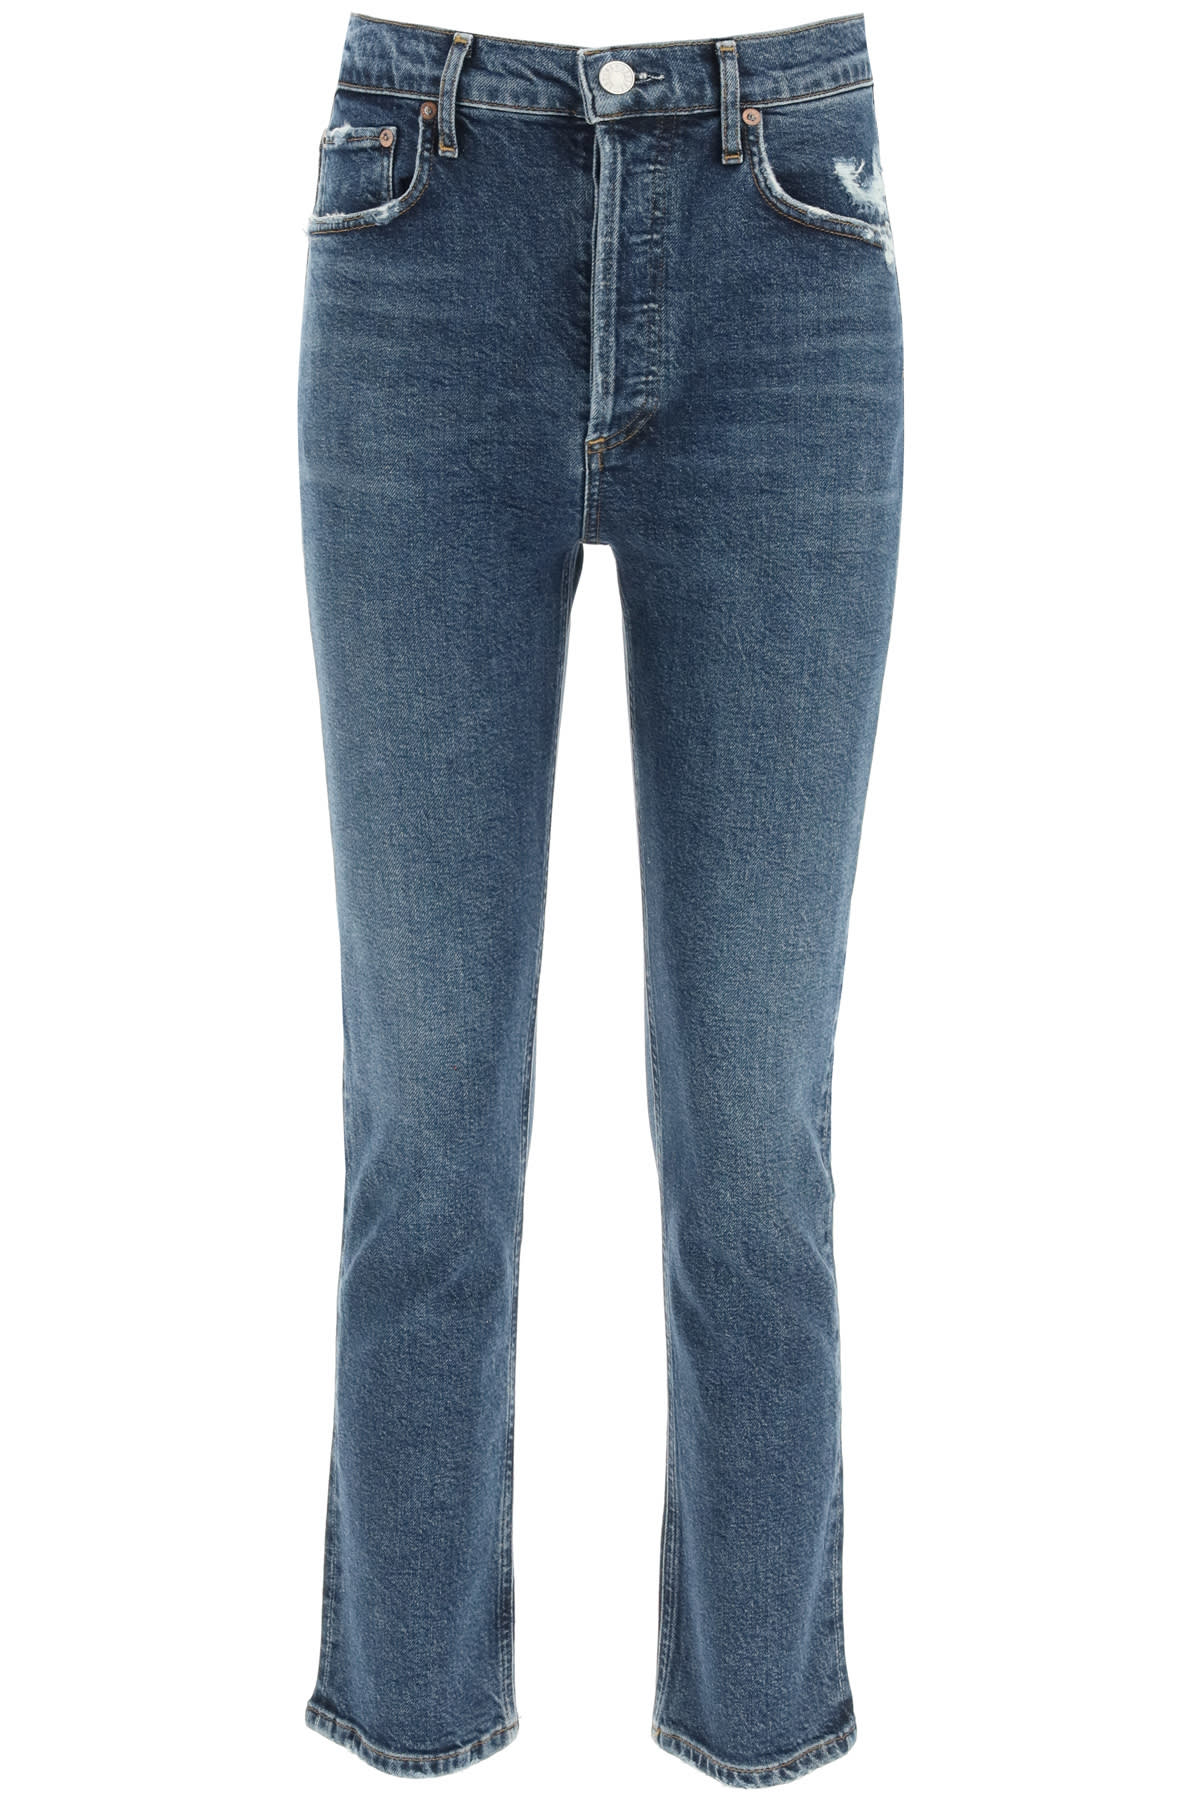 AGOLDE RILEY HIGH RISE STRAIGHT CROP JEANS,A056 1255 PSTME